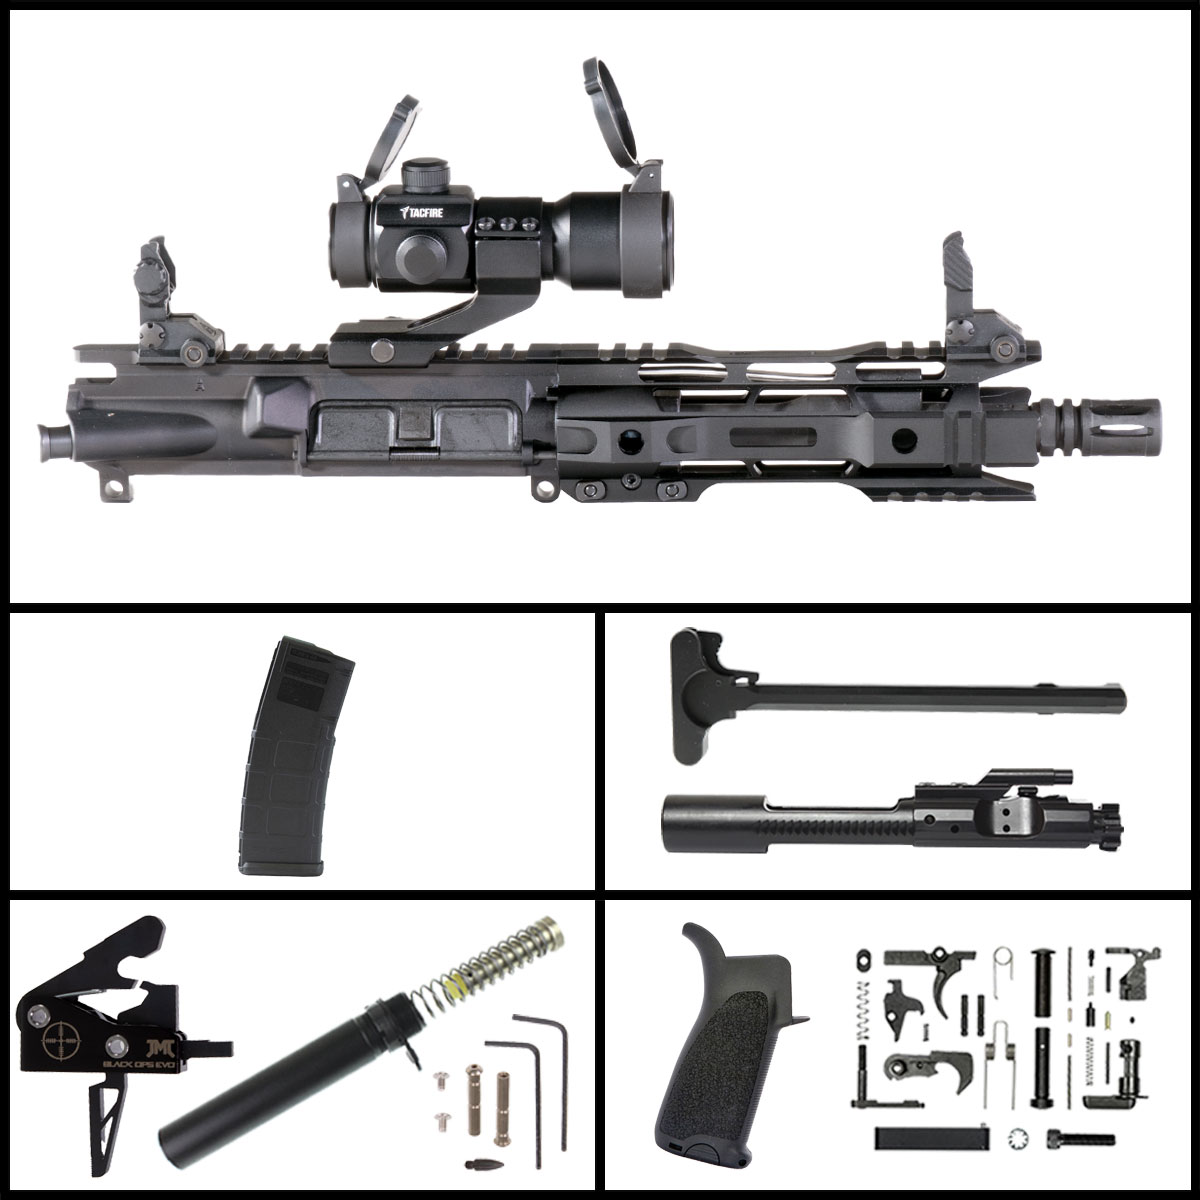 OTD 'Here and Now' 7.5-inch AR-15 5.56 NATO Manganese Phosphate Rifle Full Build Kit